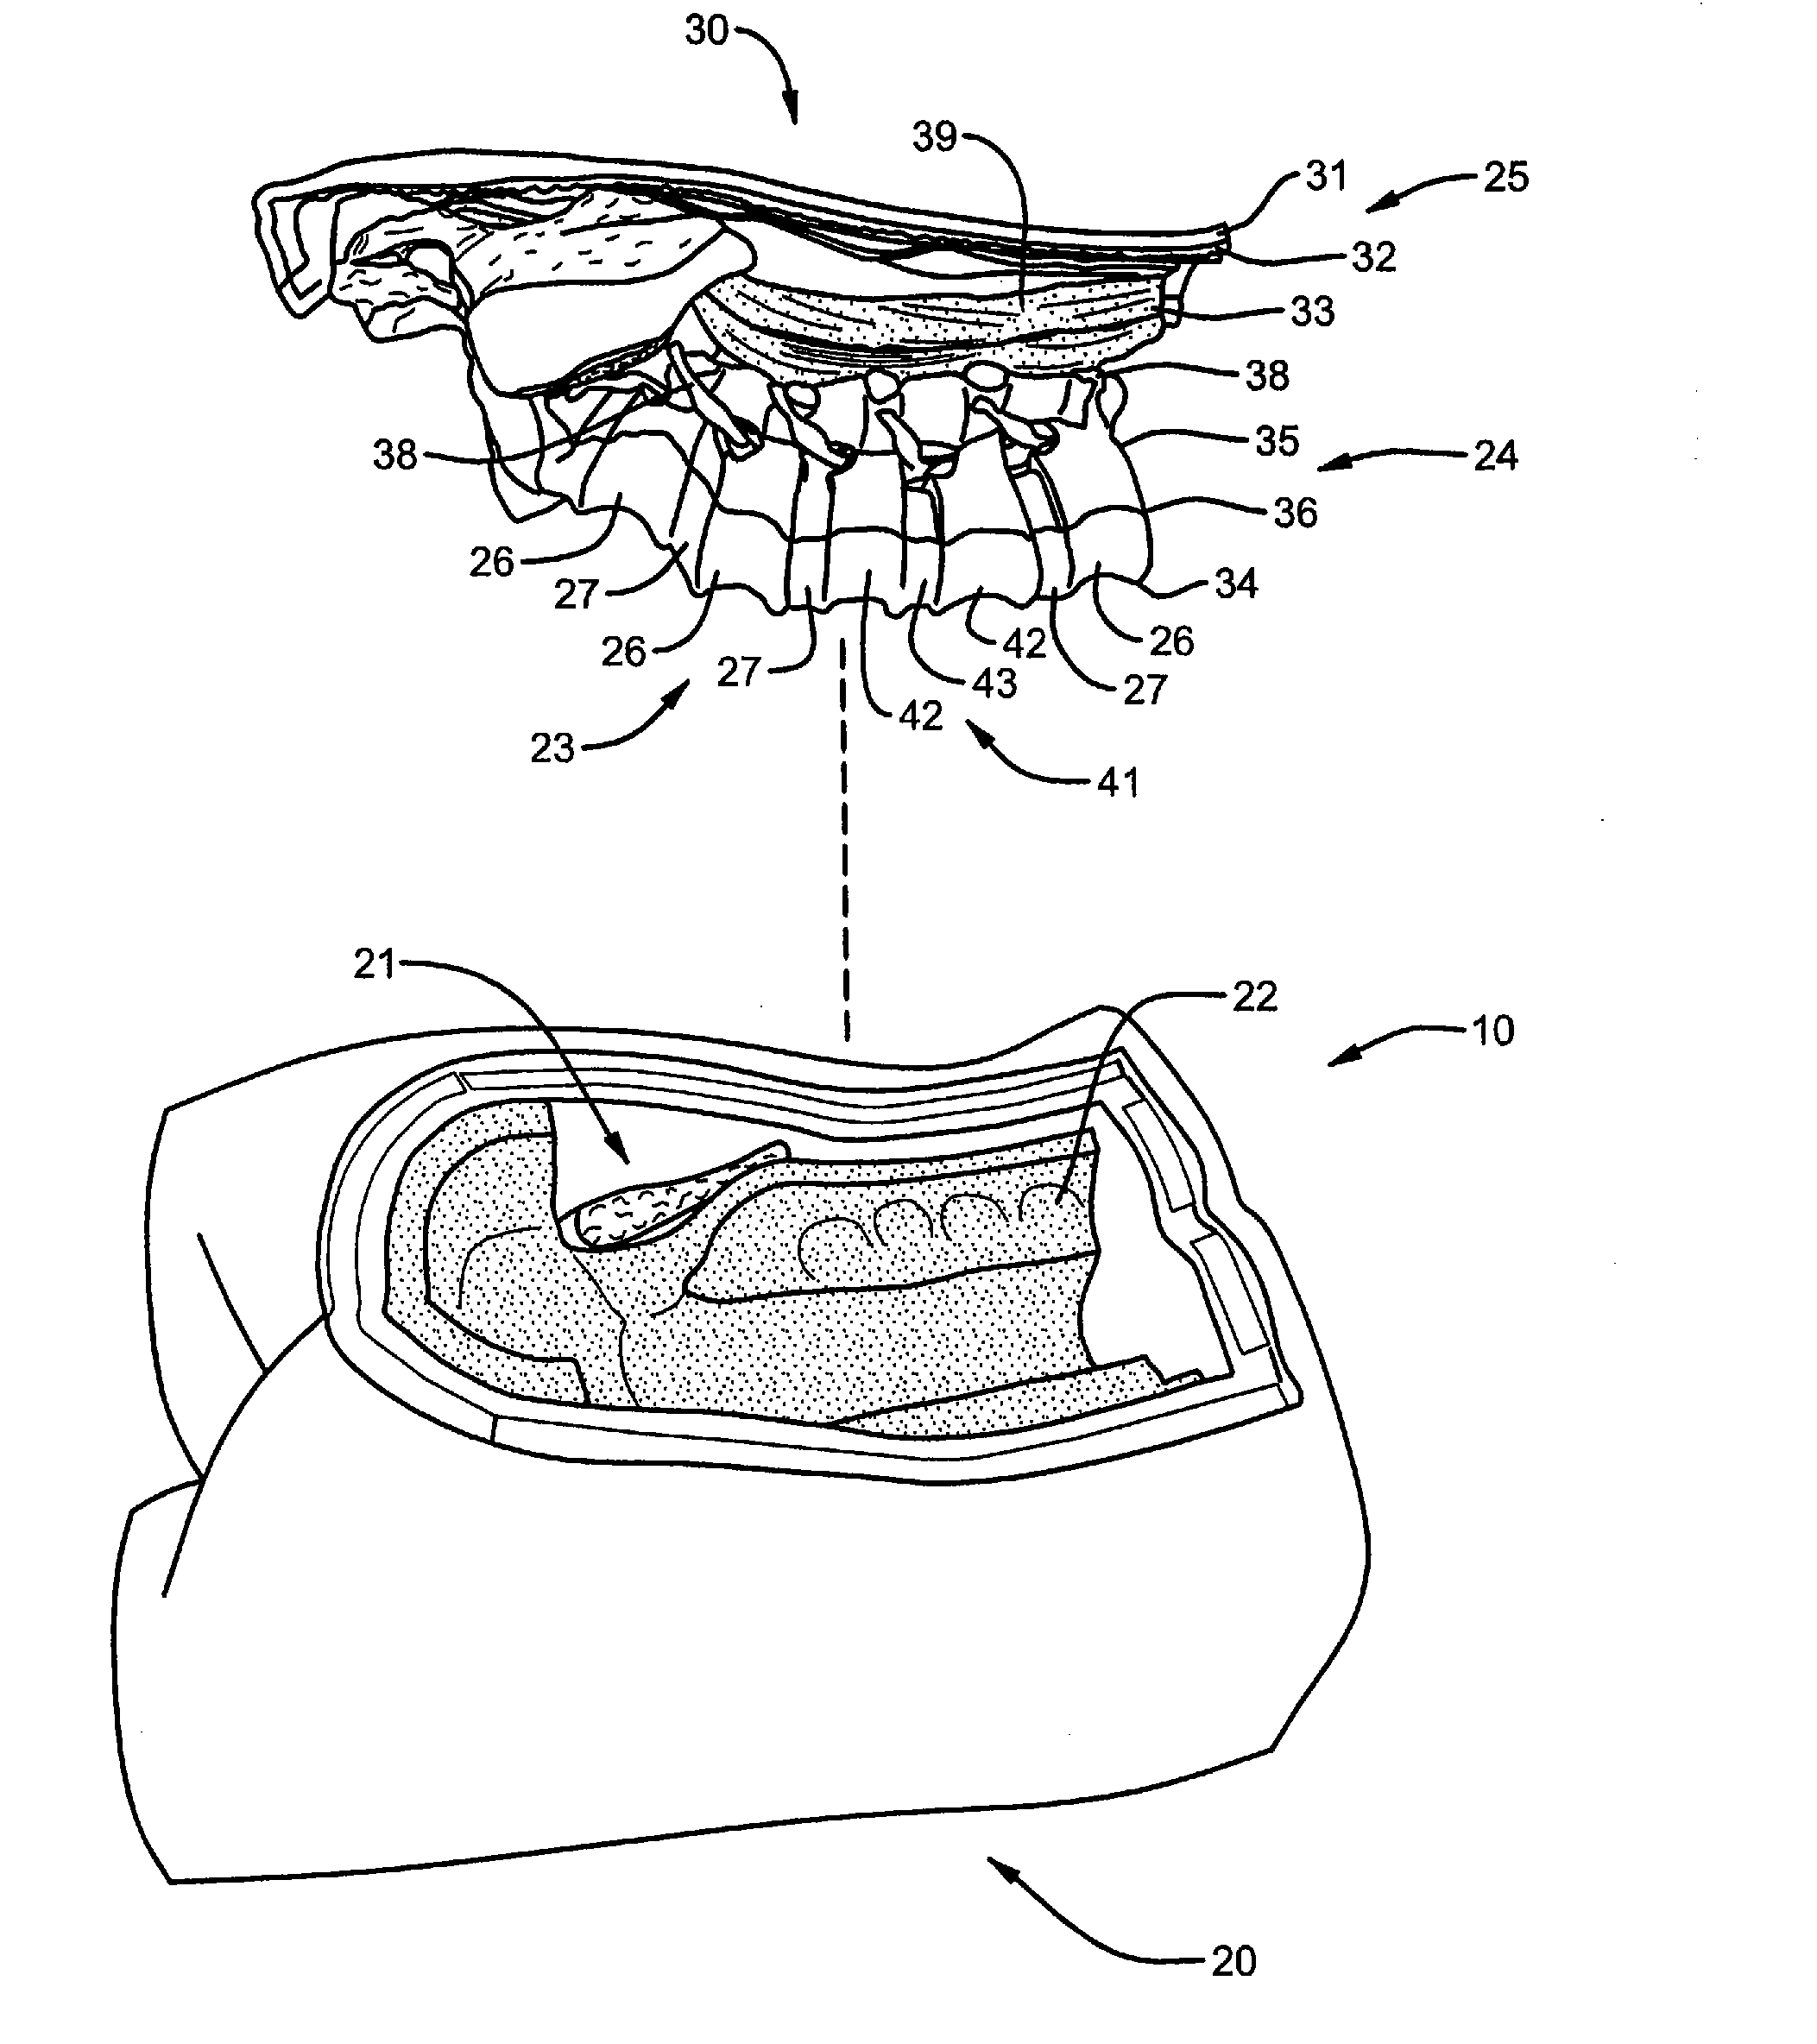 Surgical training model and method for use in facilitating training of a surgical procedure